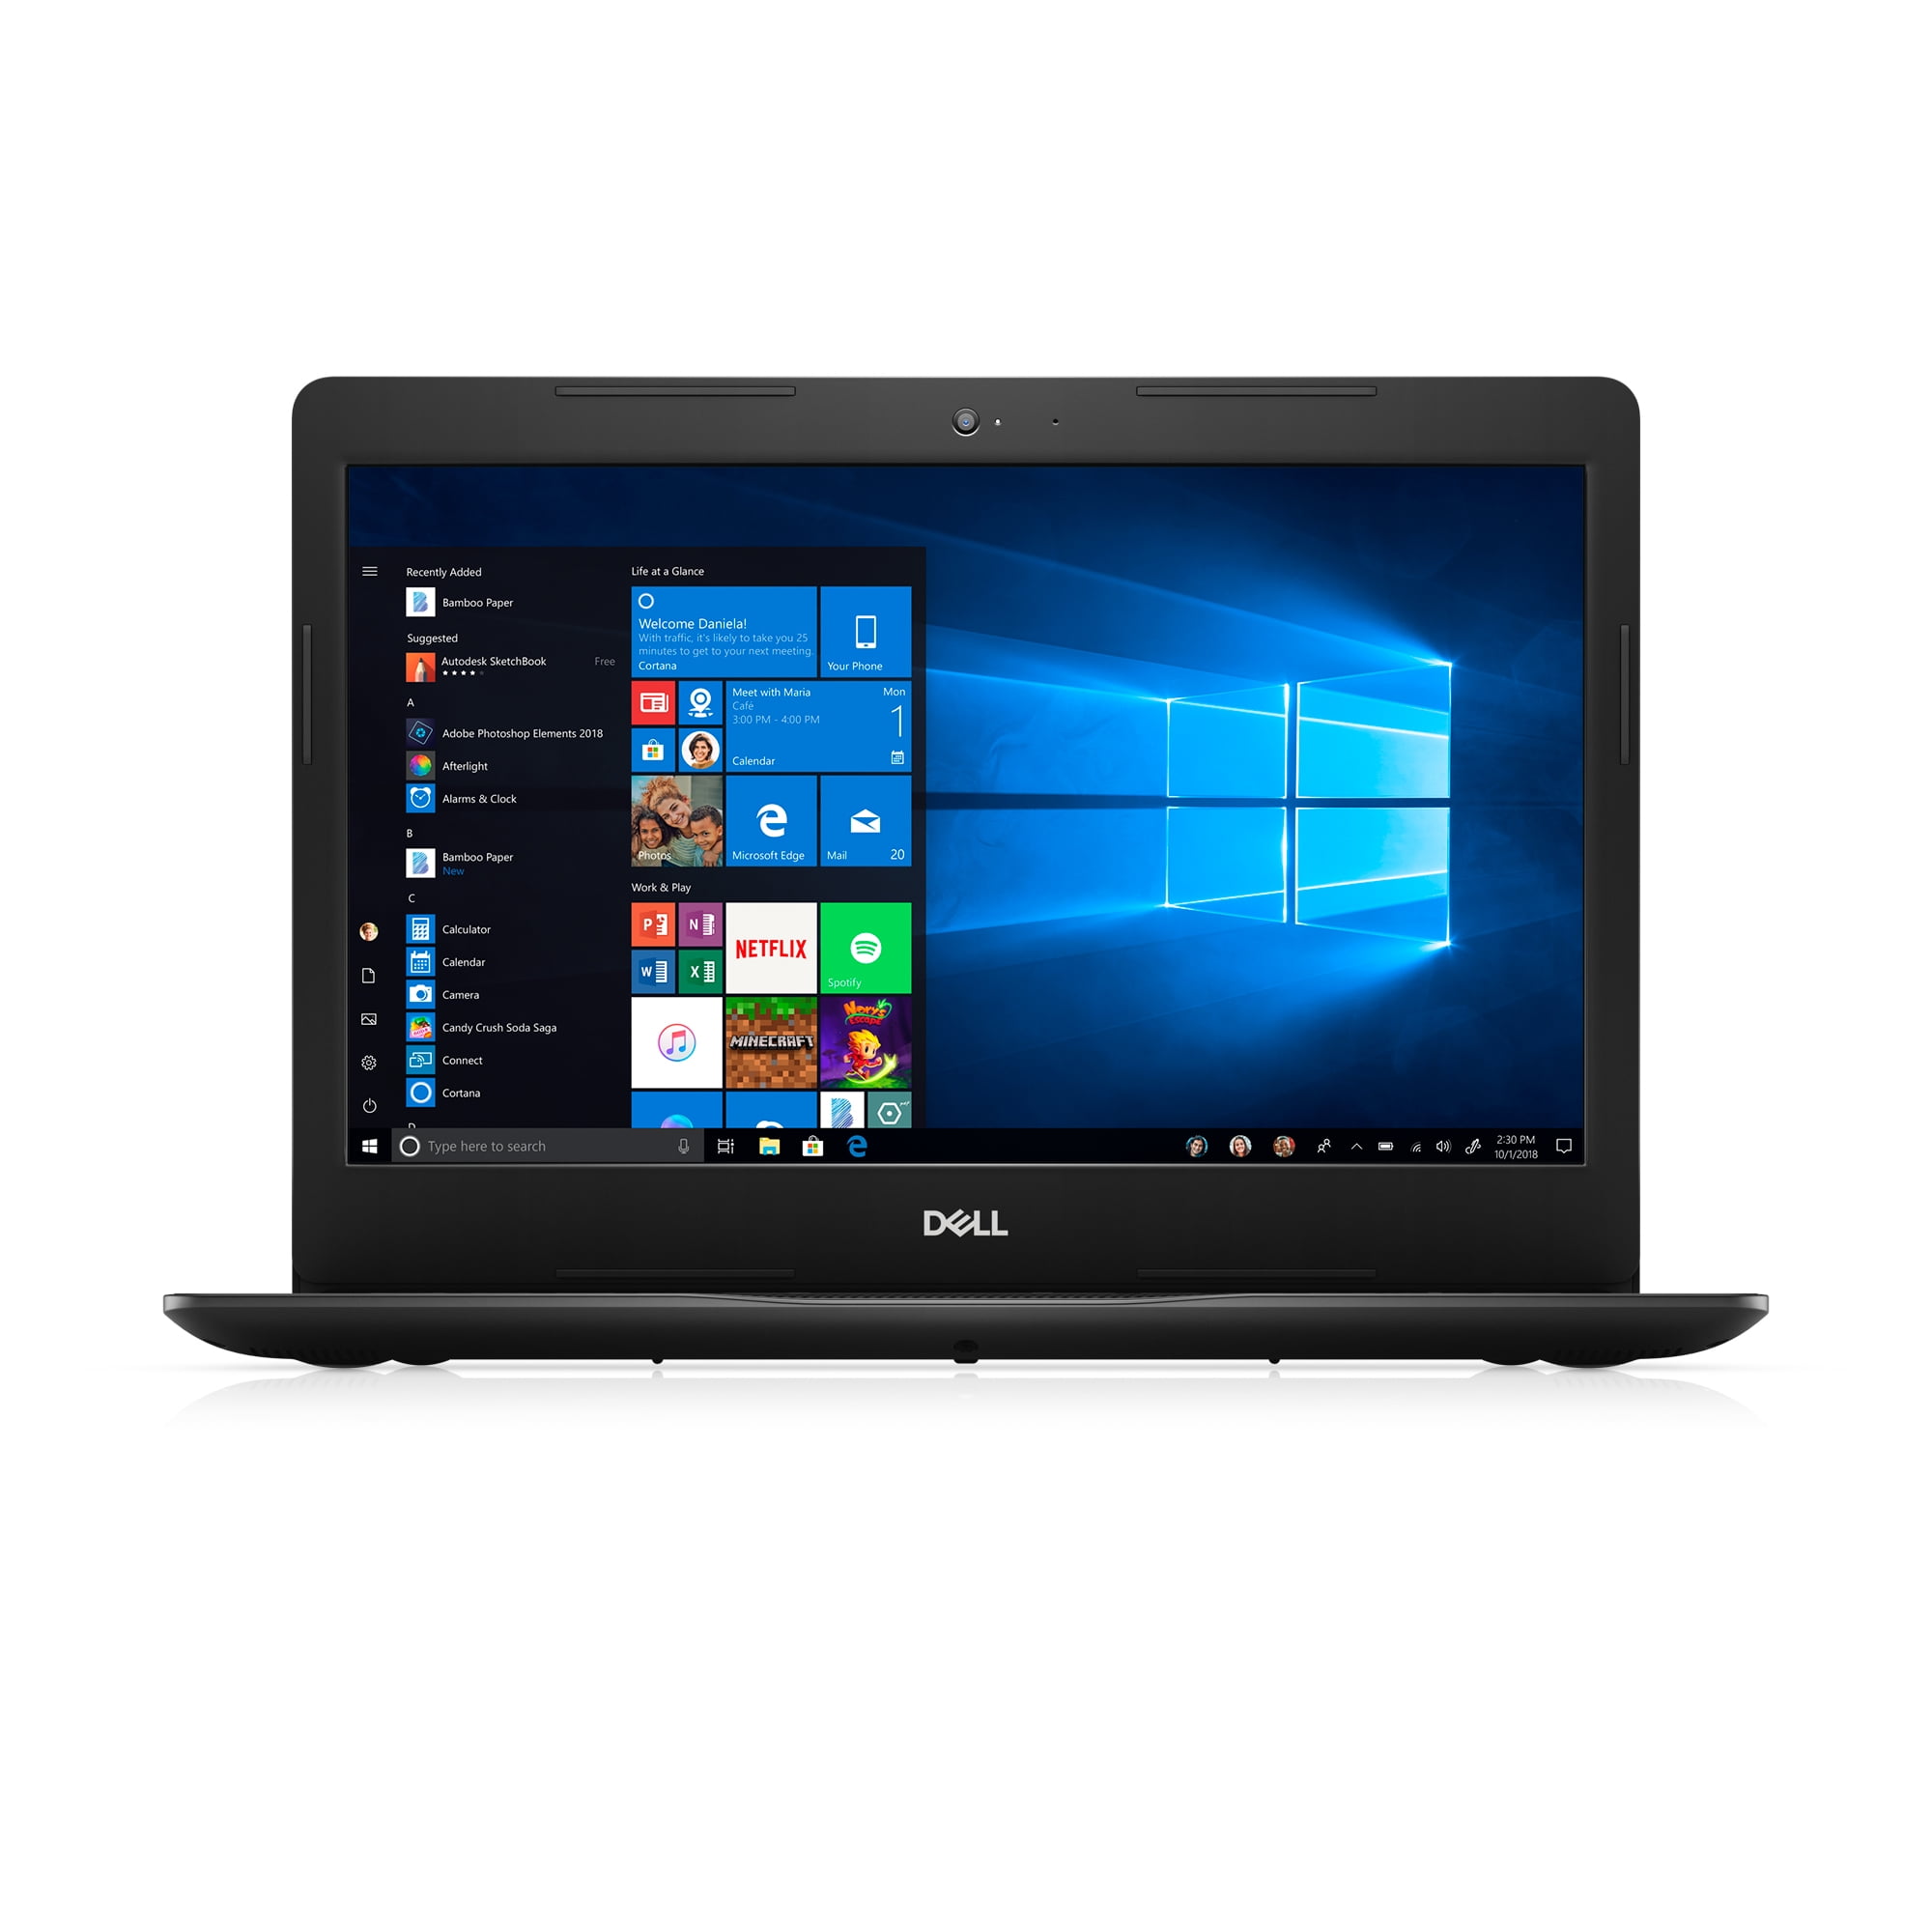 Dell Inspiron 14 5482 2-in-1 Touchscreen Laptop, 14